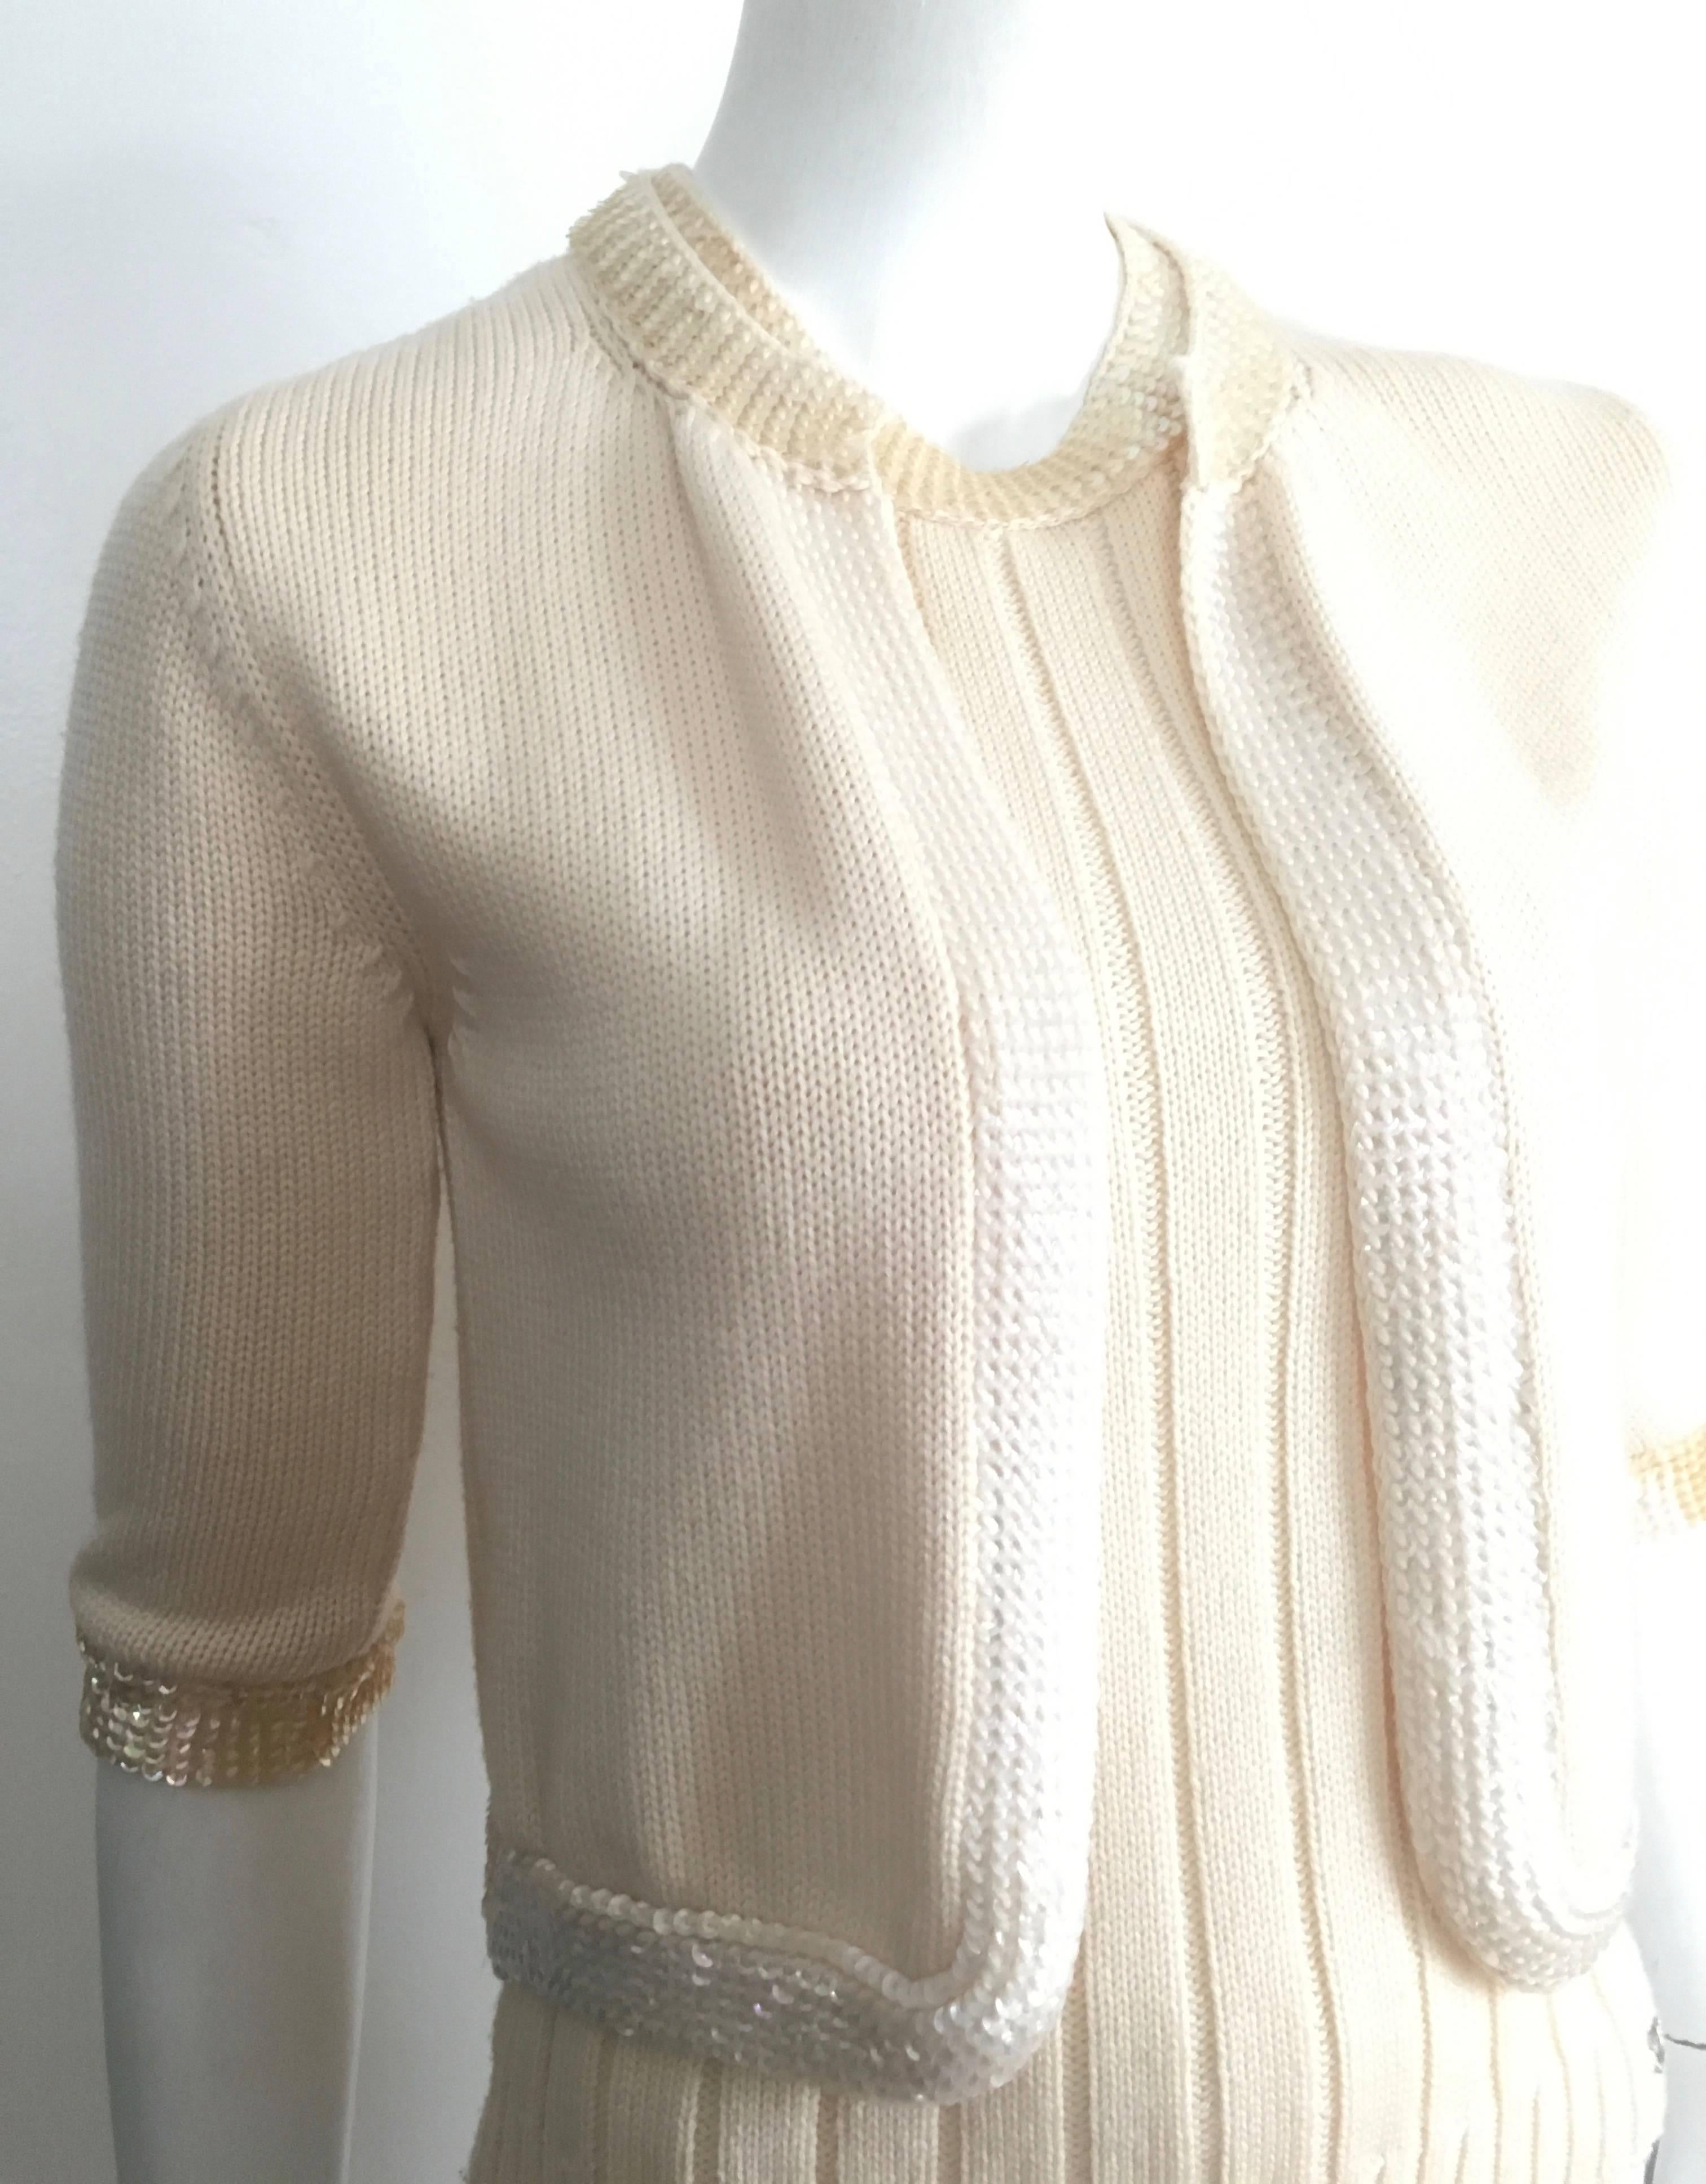 Chanel wool cream knit sequin trimmed tank & matching cardigan set is a French size 38 and fits a size 4.  Ladies if you are looking for that classic Chanel top today is your lucky day. This timeless tank & cardigan set is just perfection but when